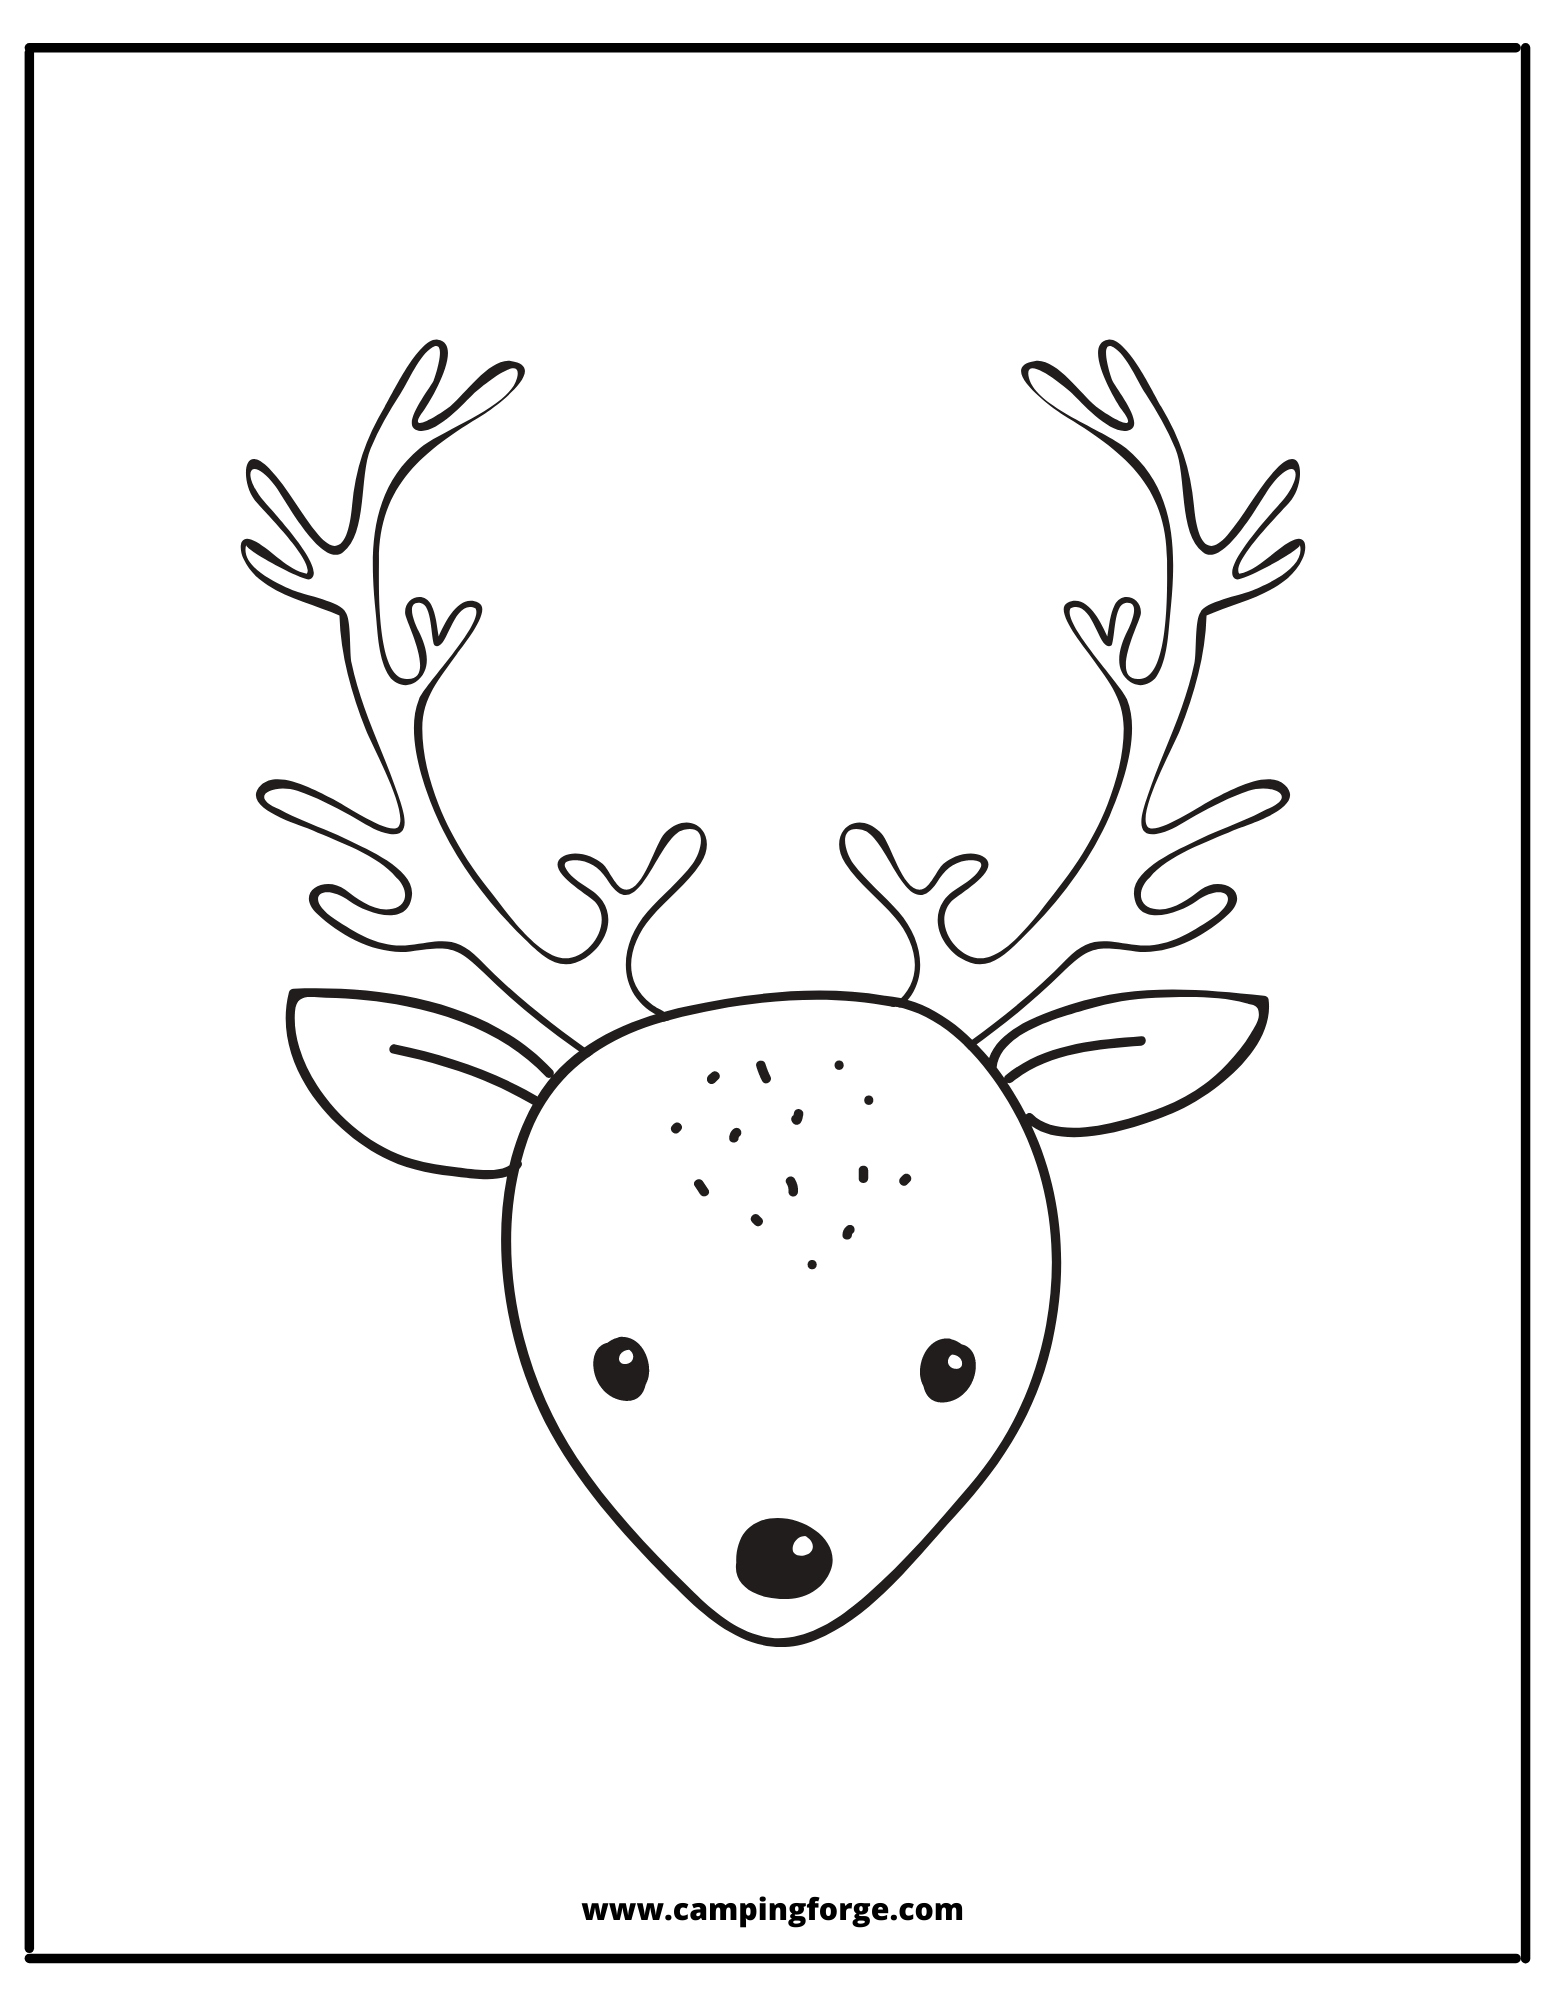 free camping themed coloring pages